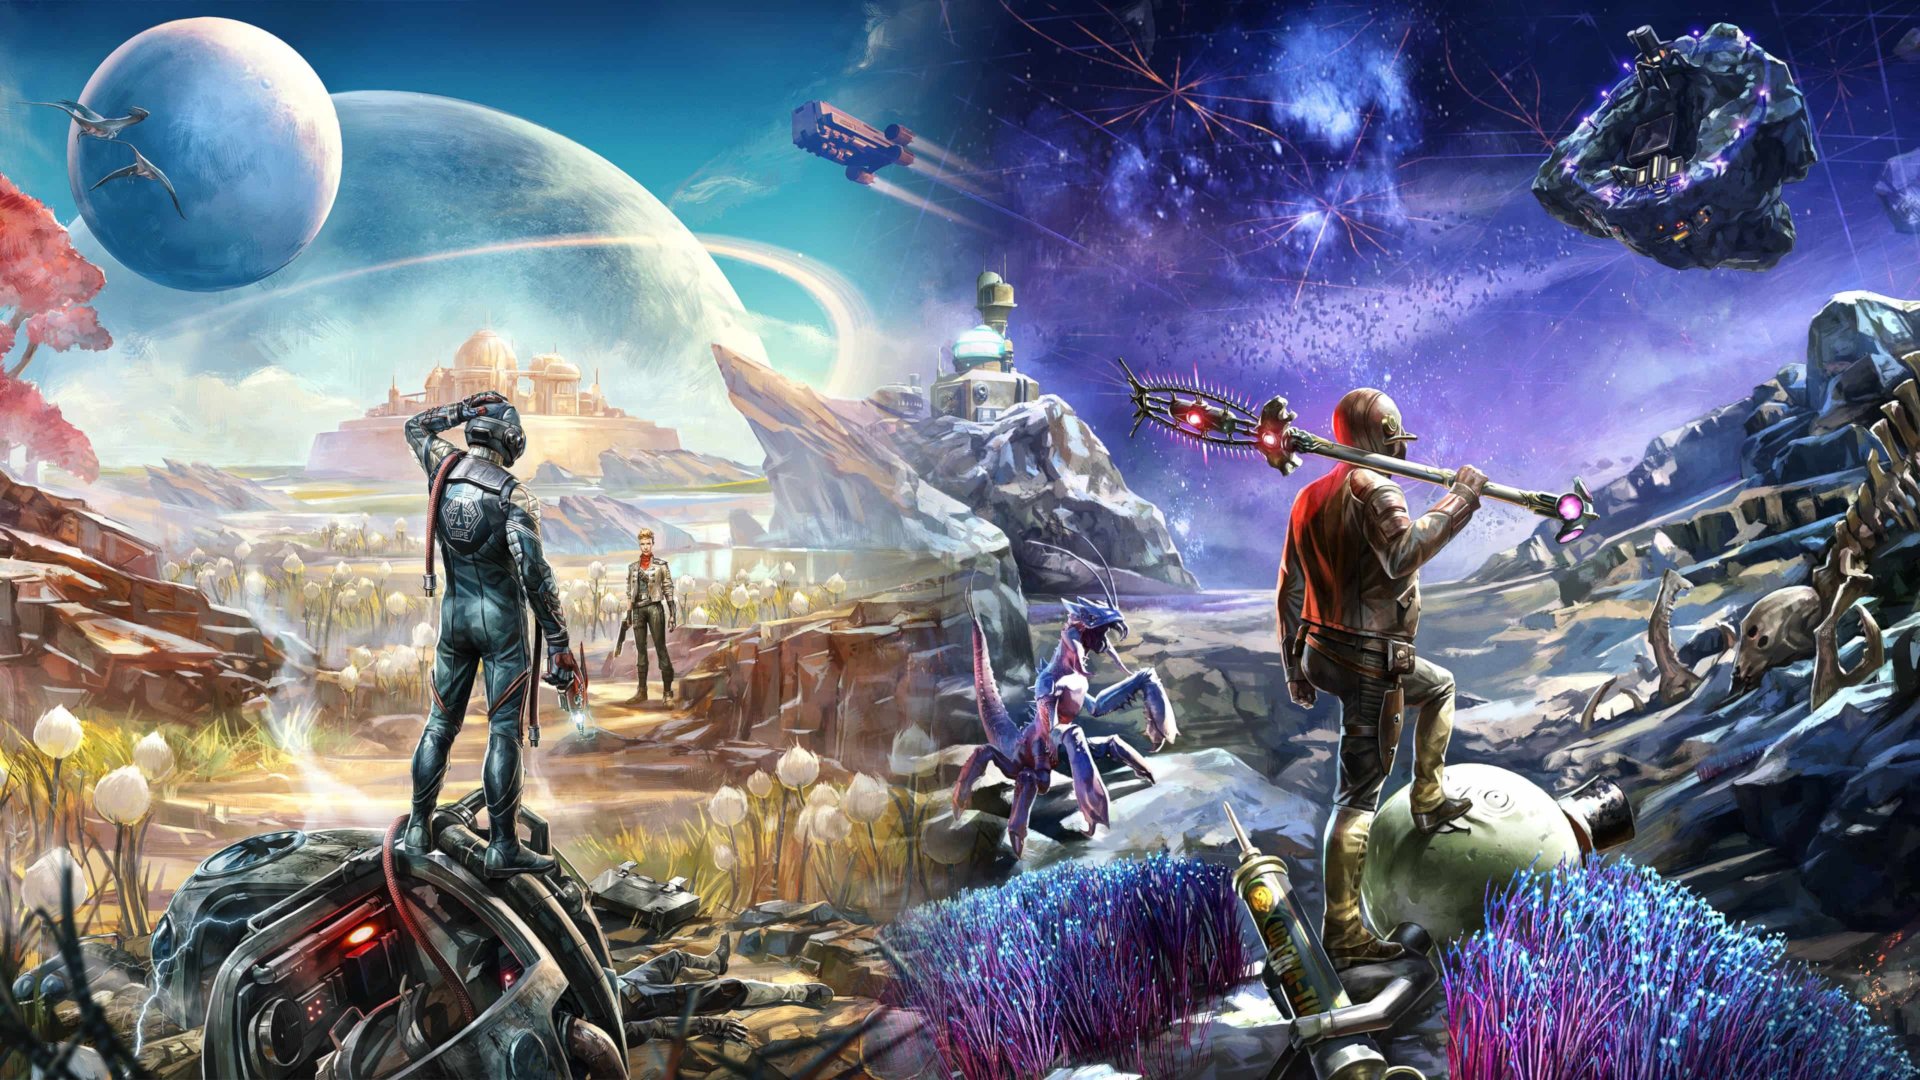 The Outer Worlds Wallpapers